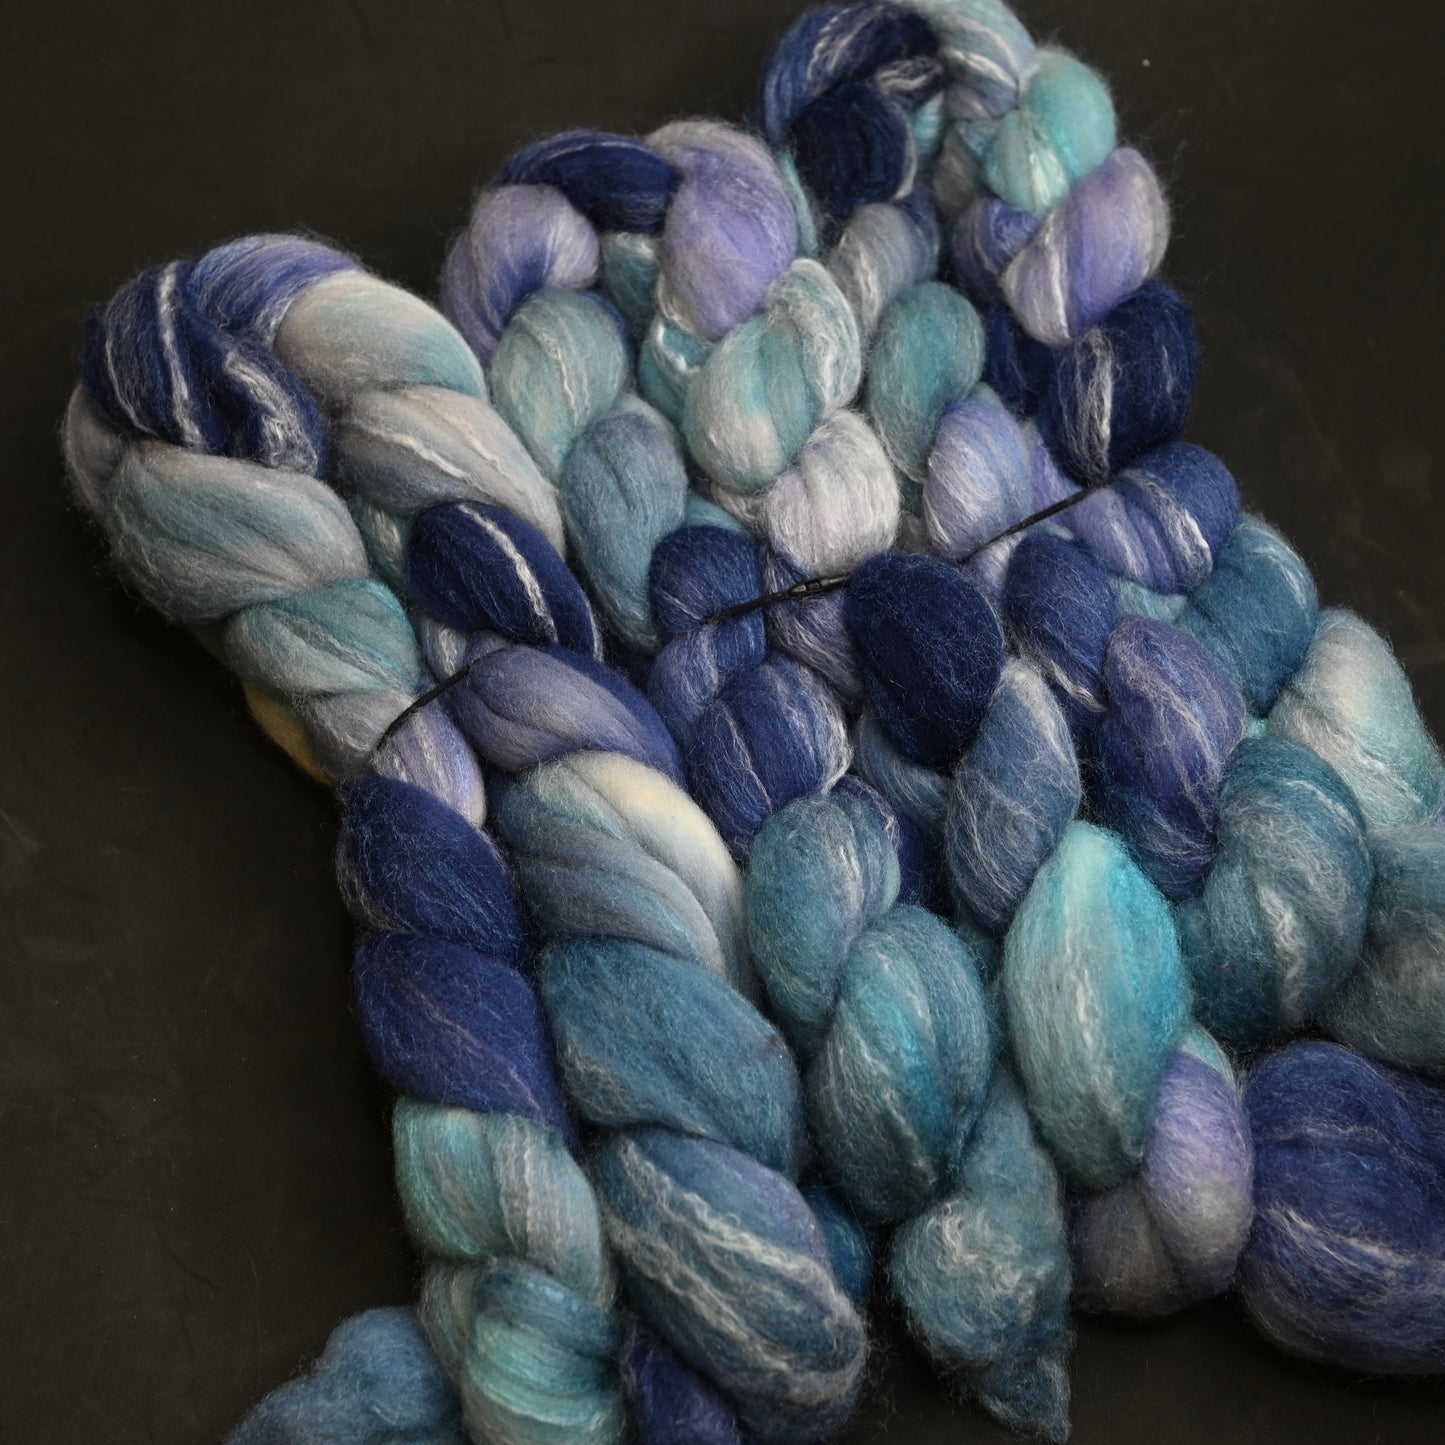 Independent Study in Turquoise/Blurple on Hand Dyed Targhee/Bamboo/Silk Combed Top - 4 oz